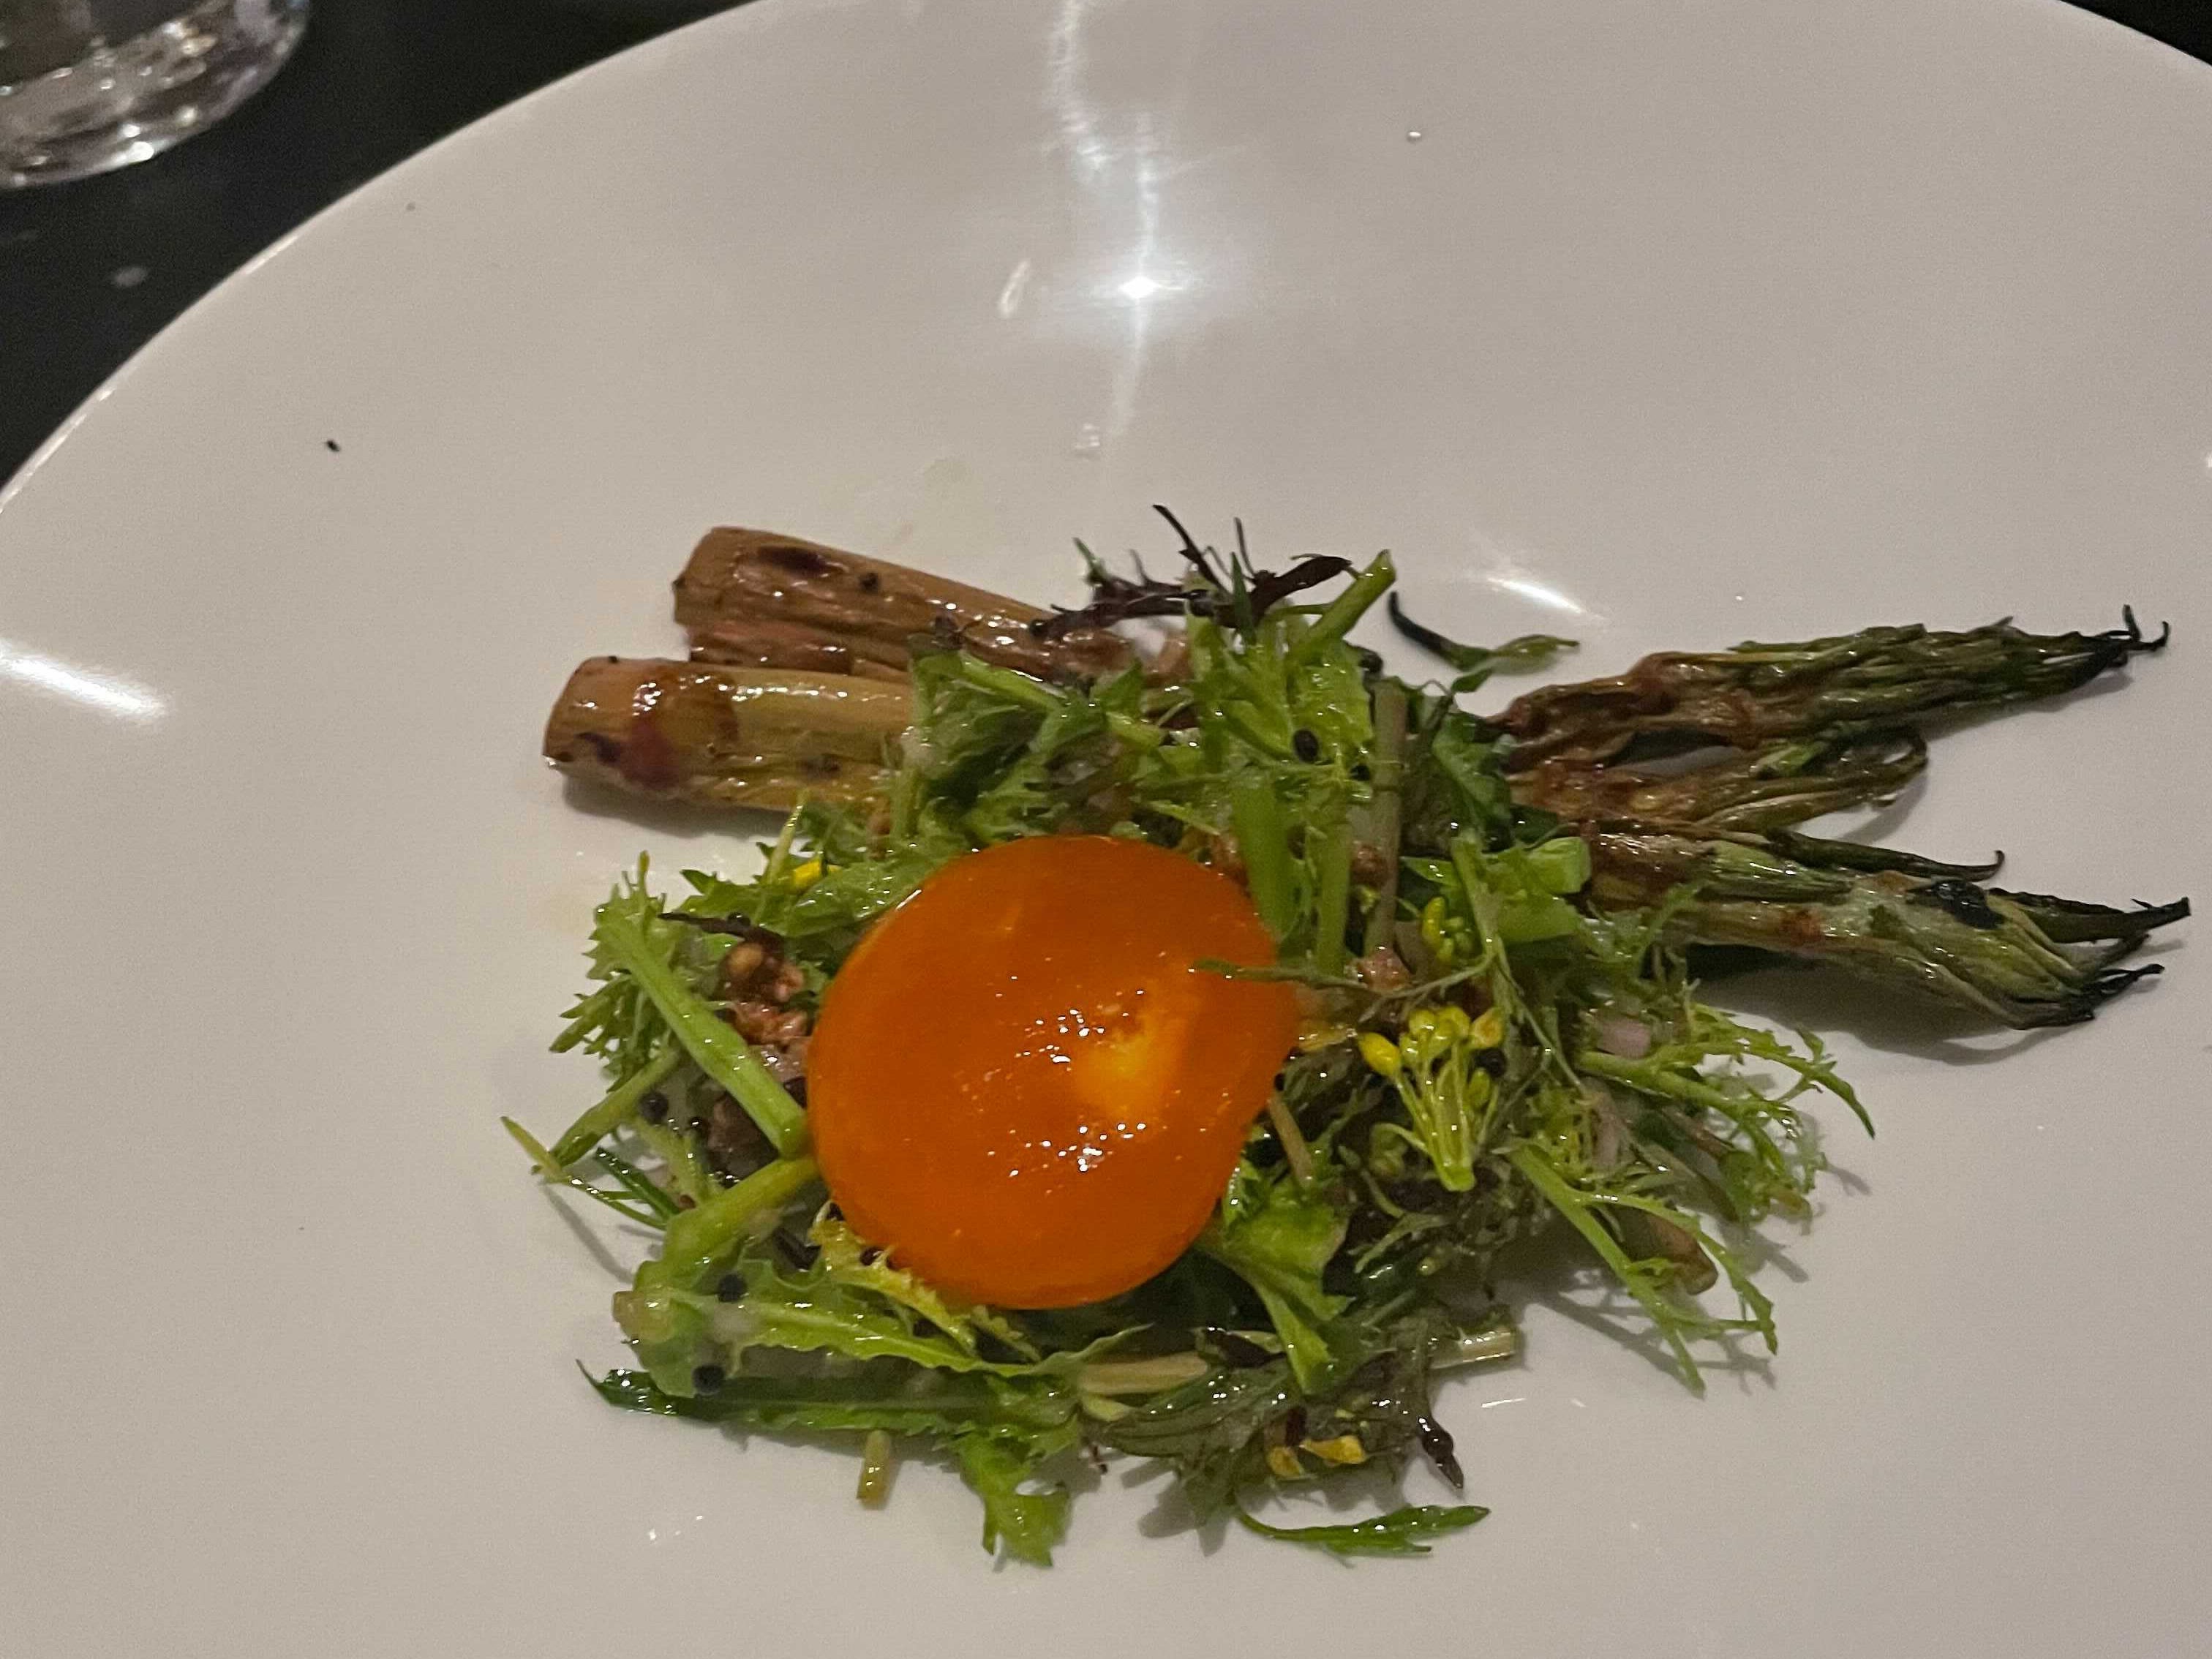 Japanese knotweed served with brassica salad and a cured egg yolk at Silo, Hackney Wick